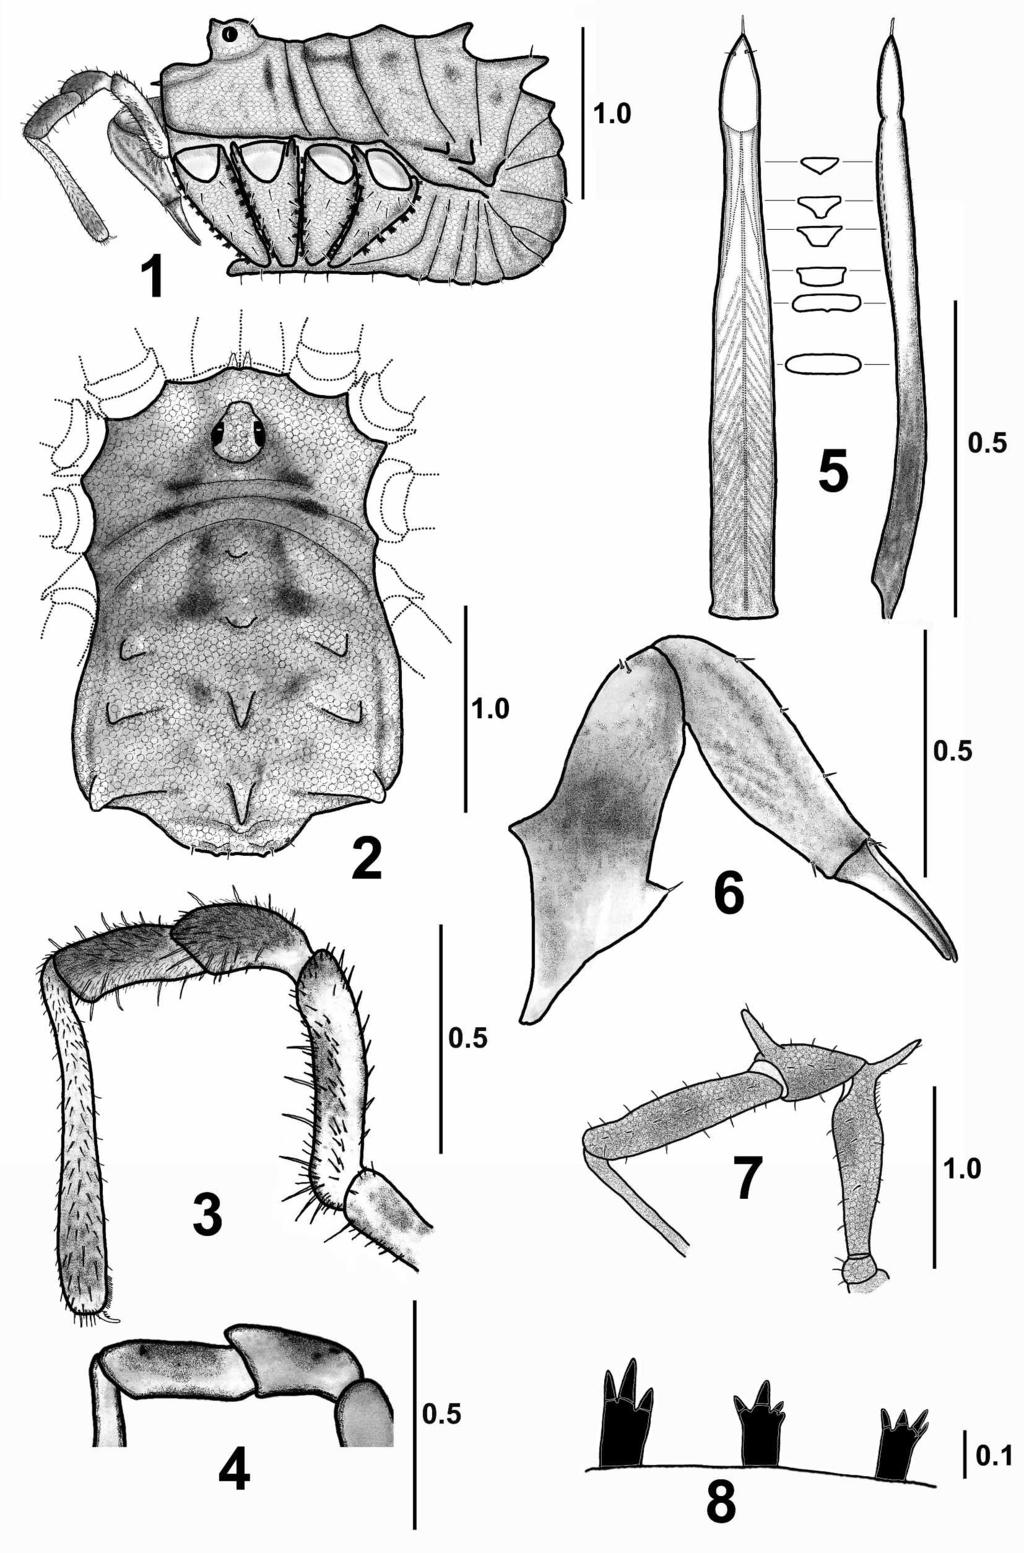 tubercles densely covered with short hairs, reaching about 1/5 of length of trochanter; similar but smaller prolateral tubercles also on coxa IV (Fig. 2). FIGURES 1 8. Umbopilio martensi n. sp.